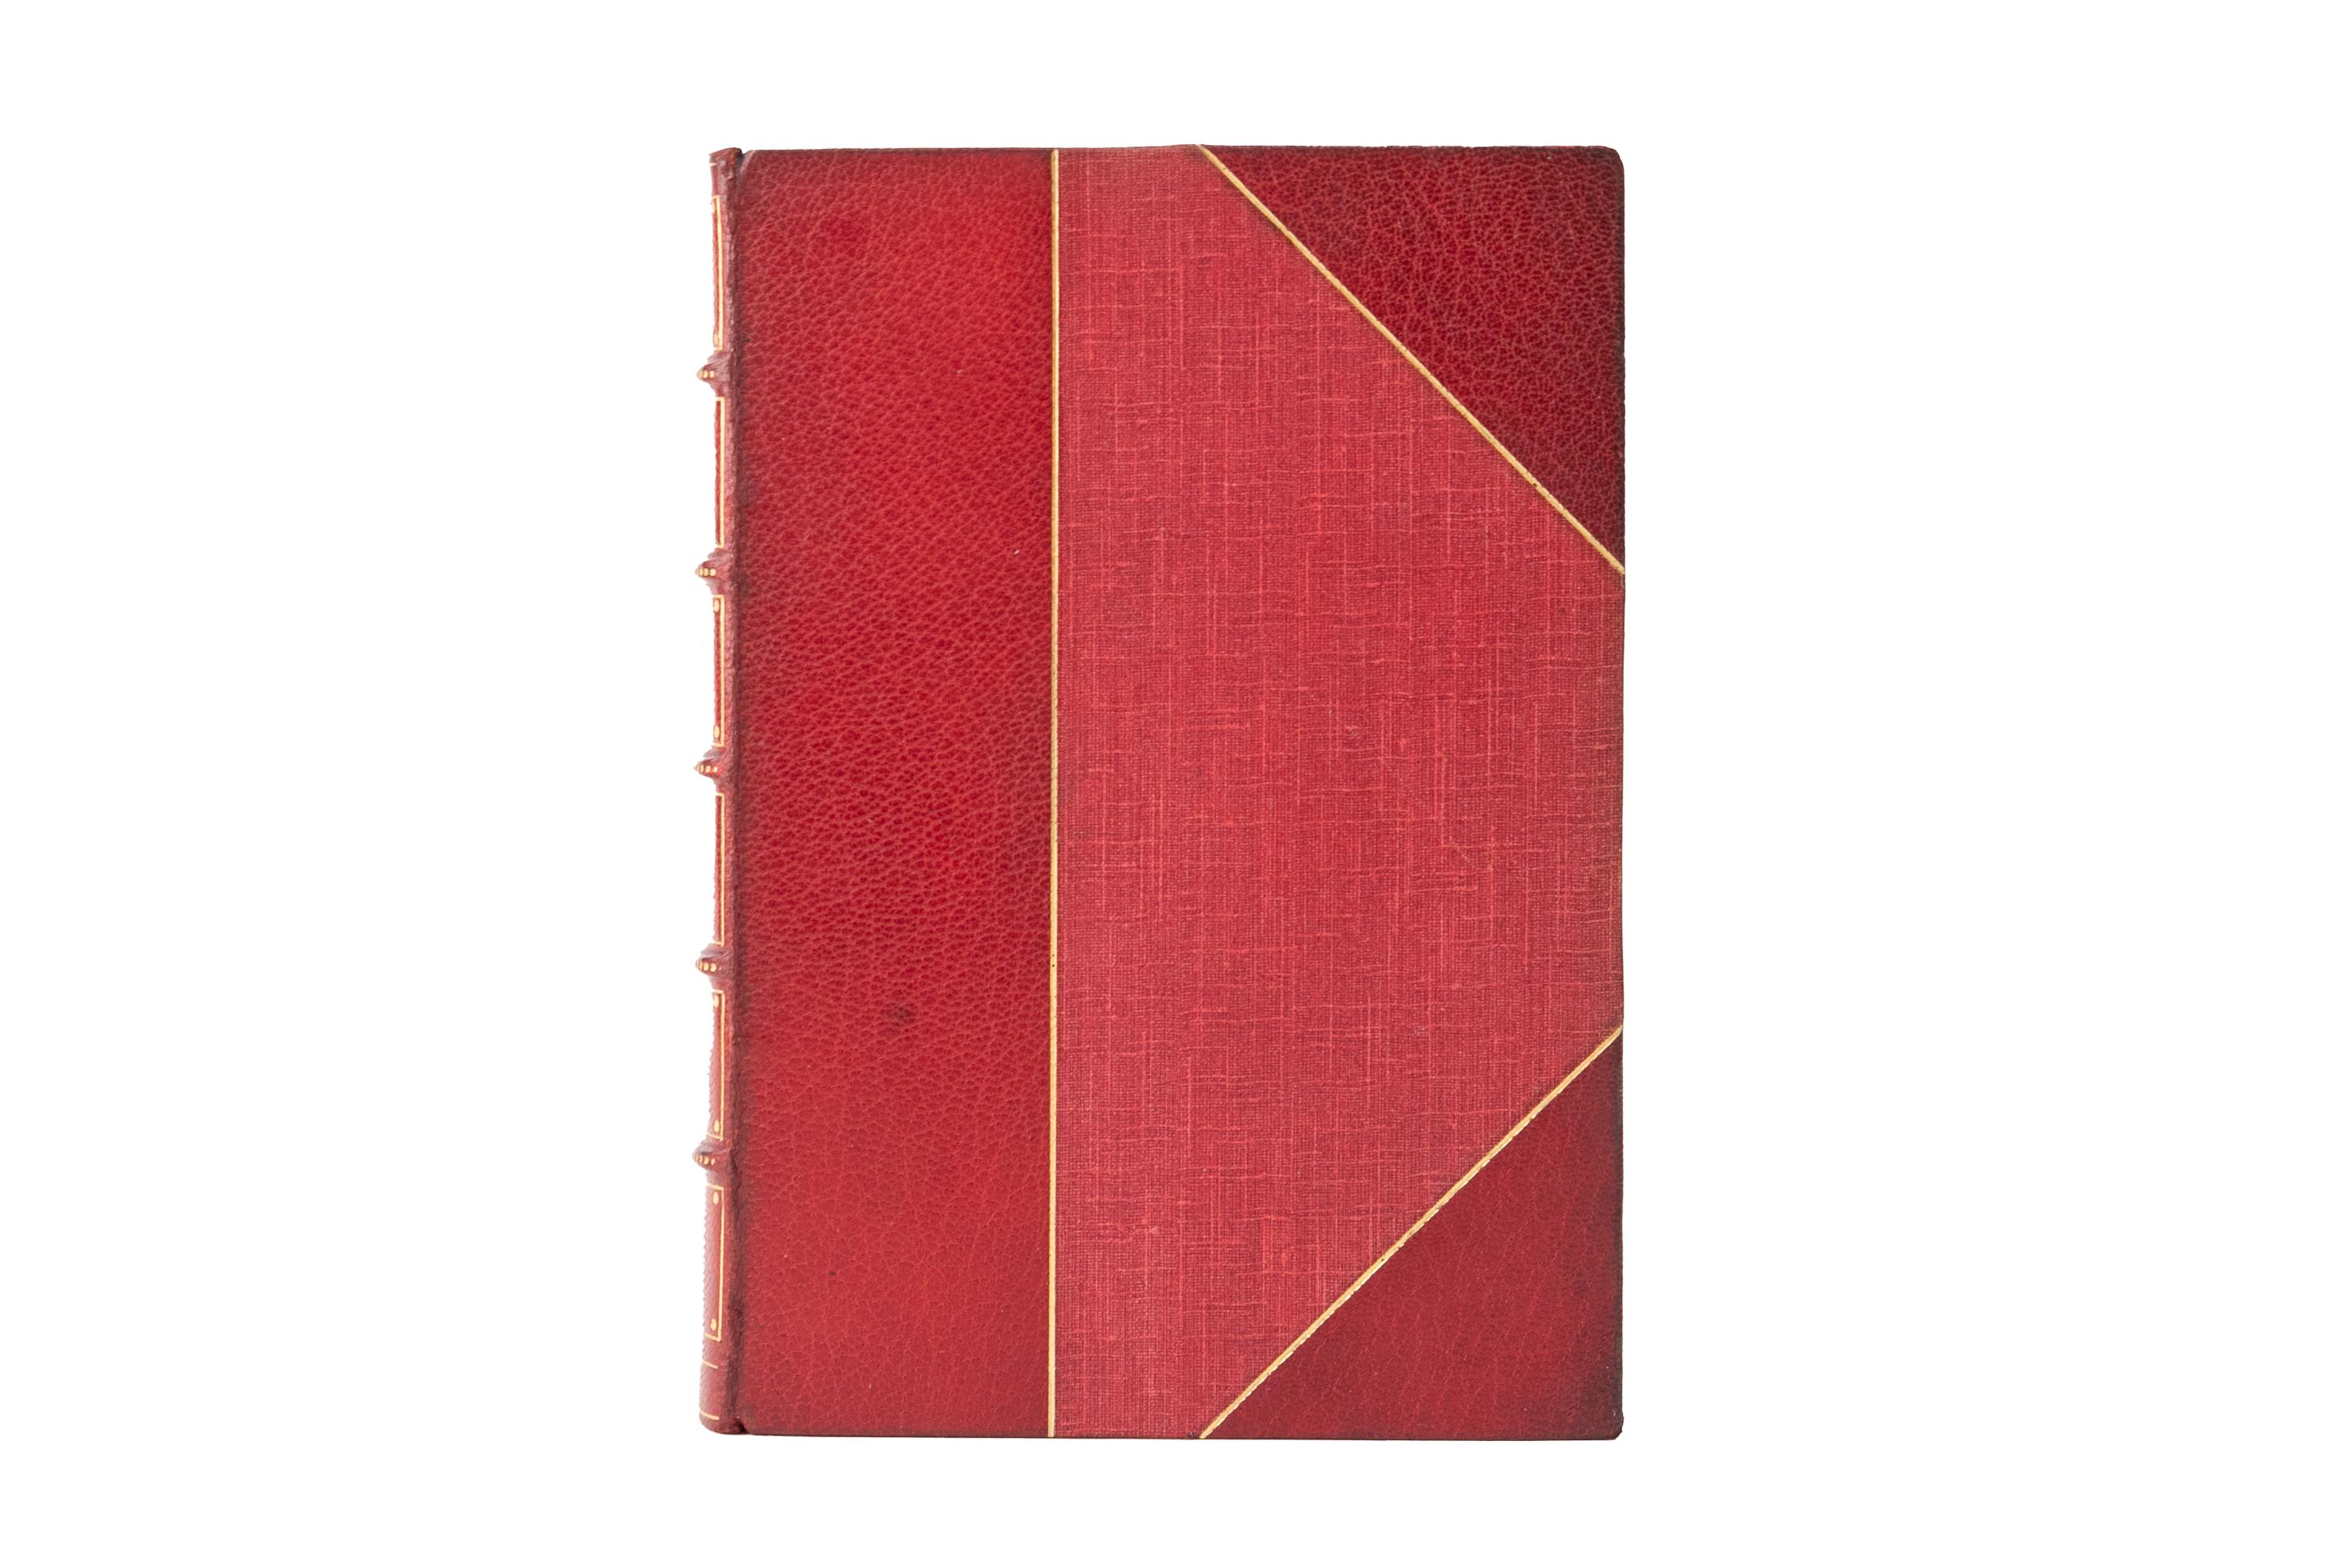 4 Volumes. Thomas Carlyle, Cromwell's Letters. Bound in 3/4 red morocco and linen boards bordered in gilt-tooling. Raised band spines decorated with gilt-tooling. Top edge gilt with linen endpapers. Includes Elucidations. London: Chapman & Hall,